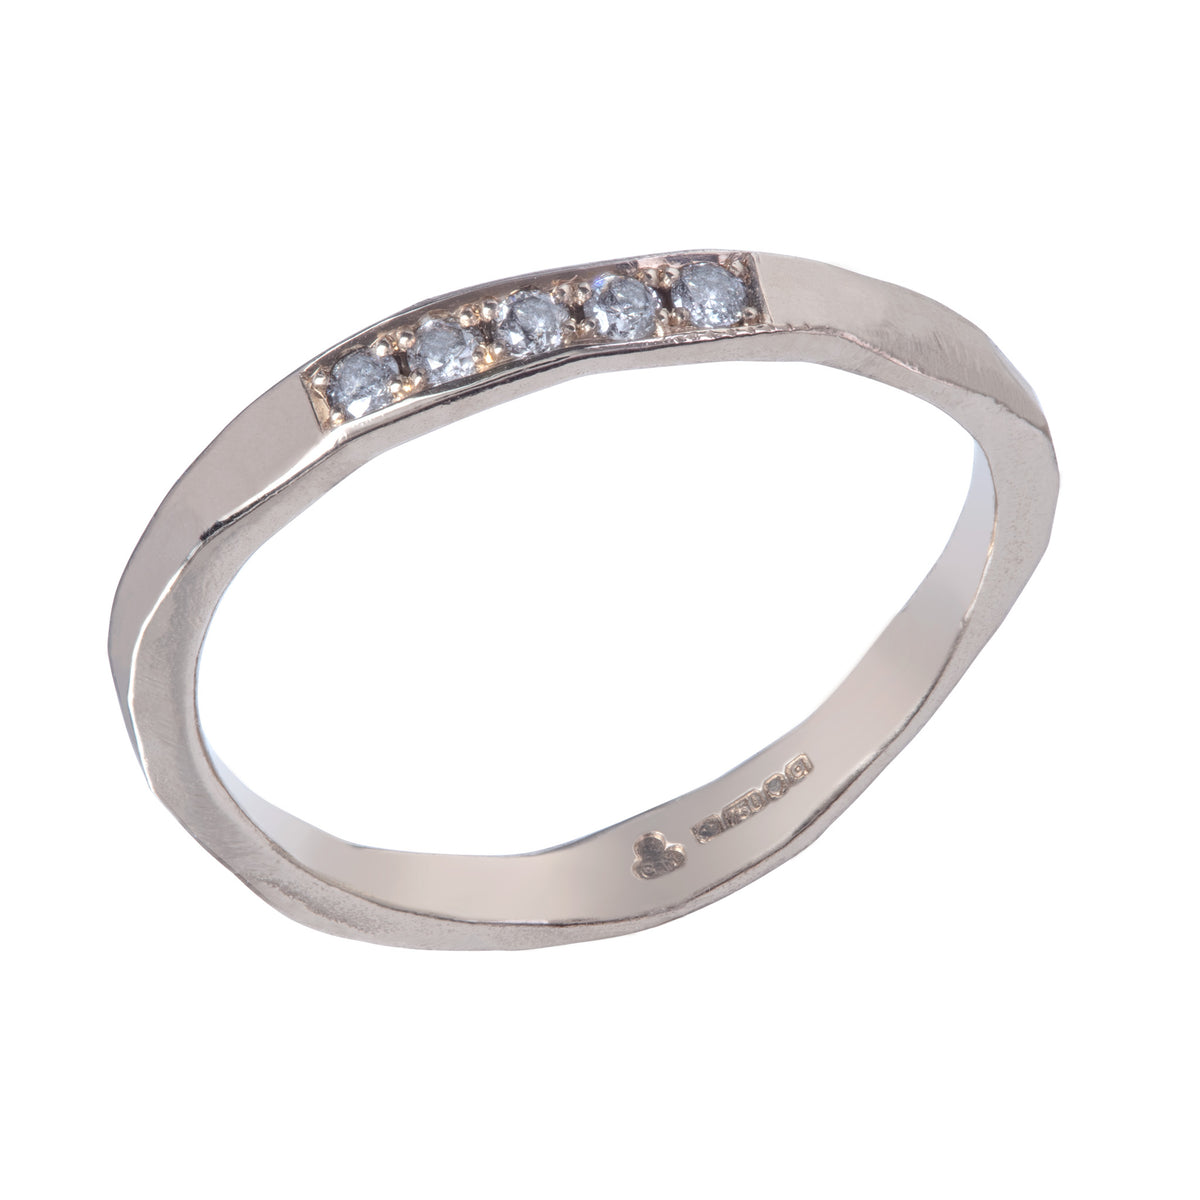 Trust Ring with 5 Grey Diamonds in Yellow or White Gold or Platinum